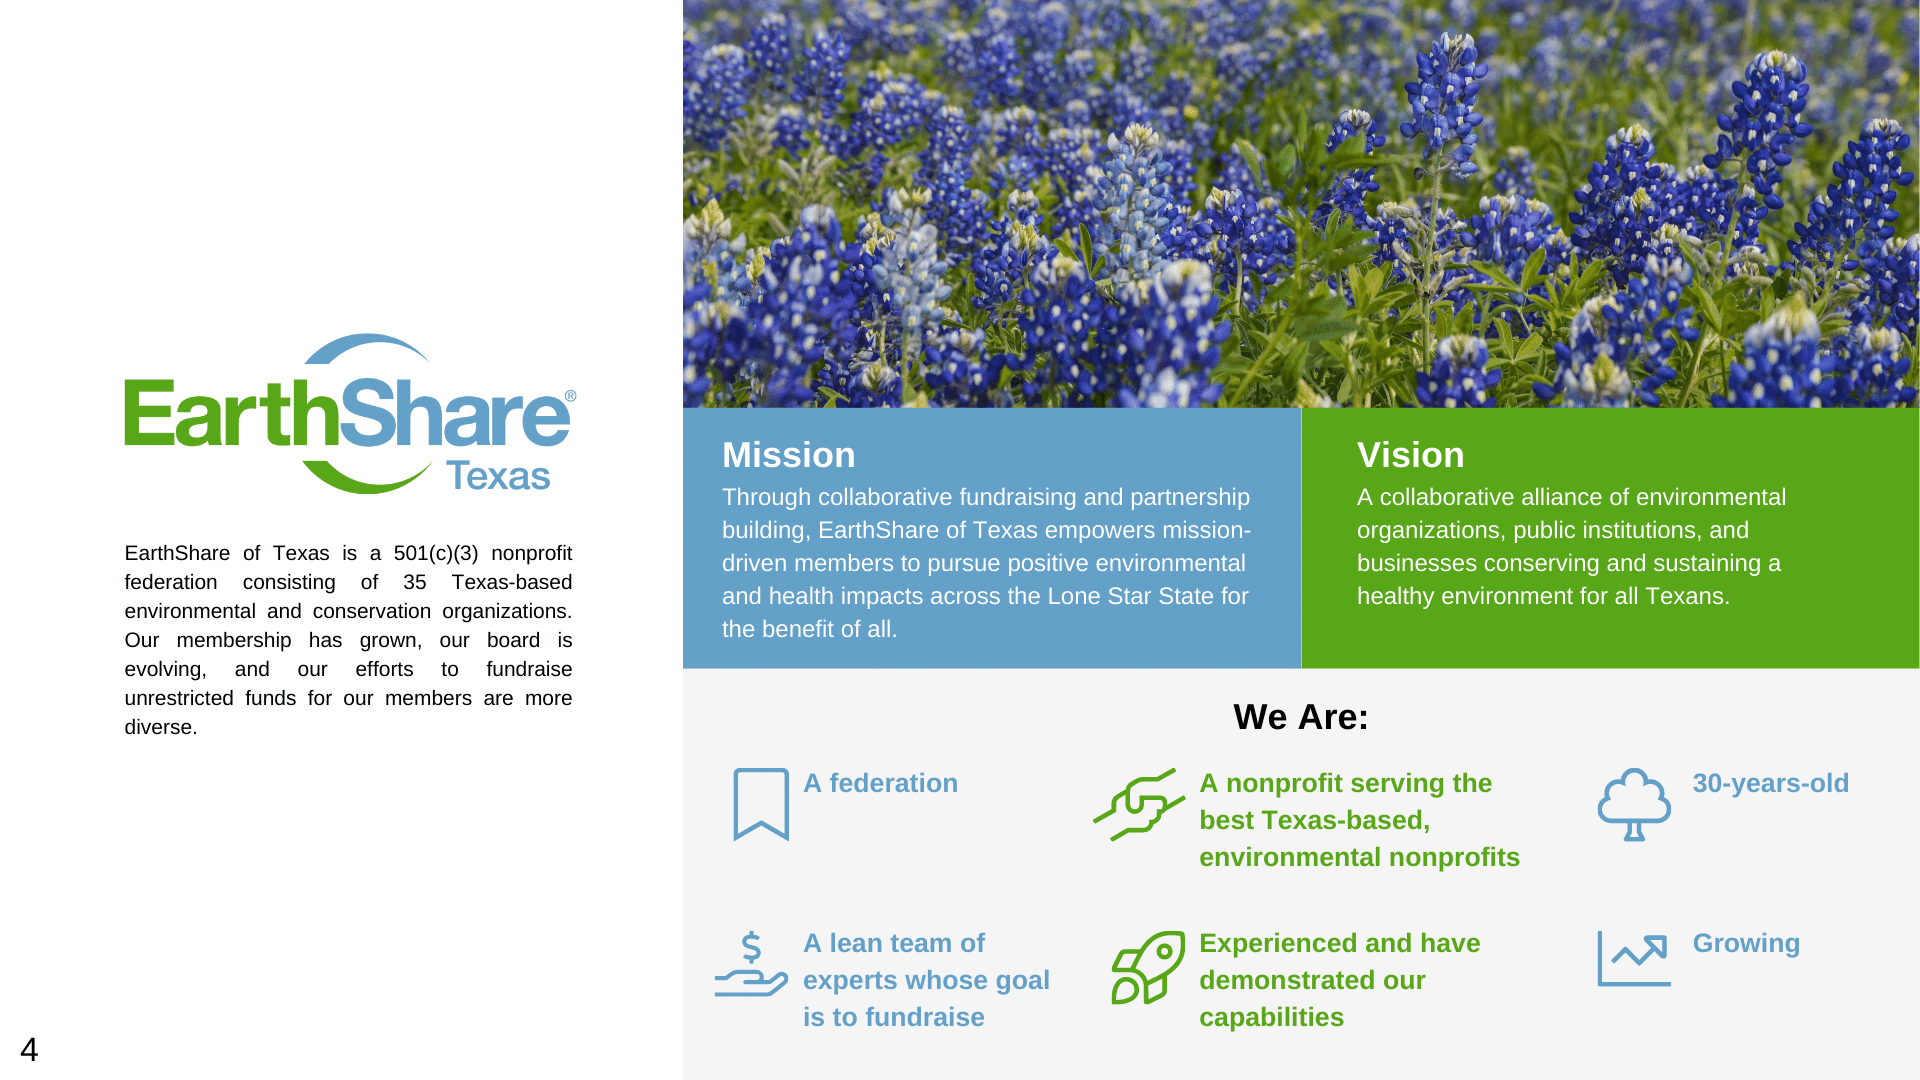 earthshare of texas 2021 impact report about and introduction